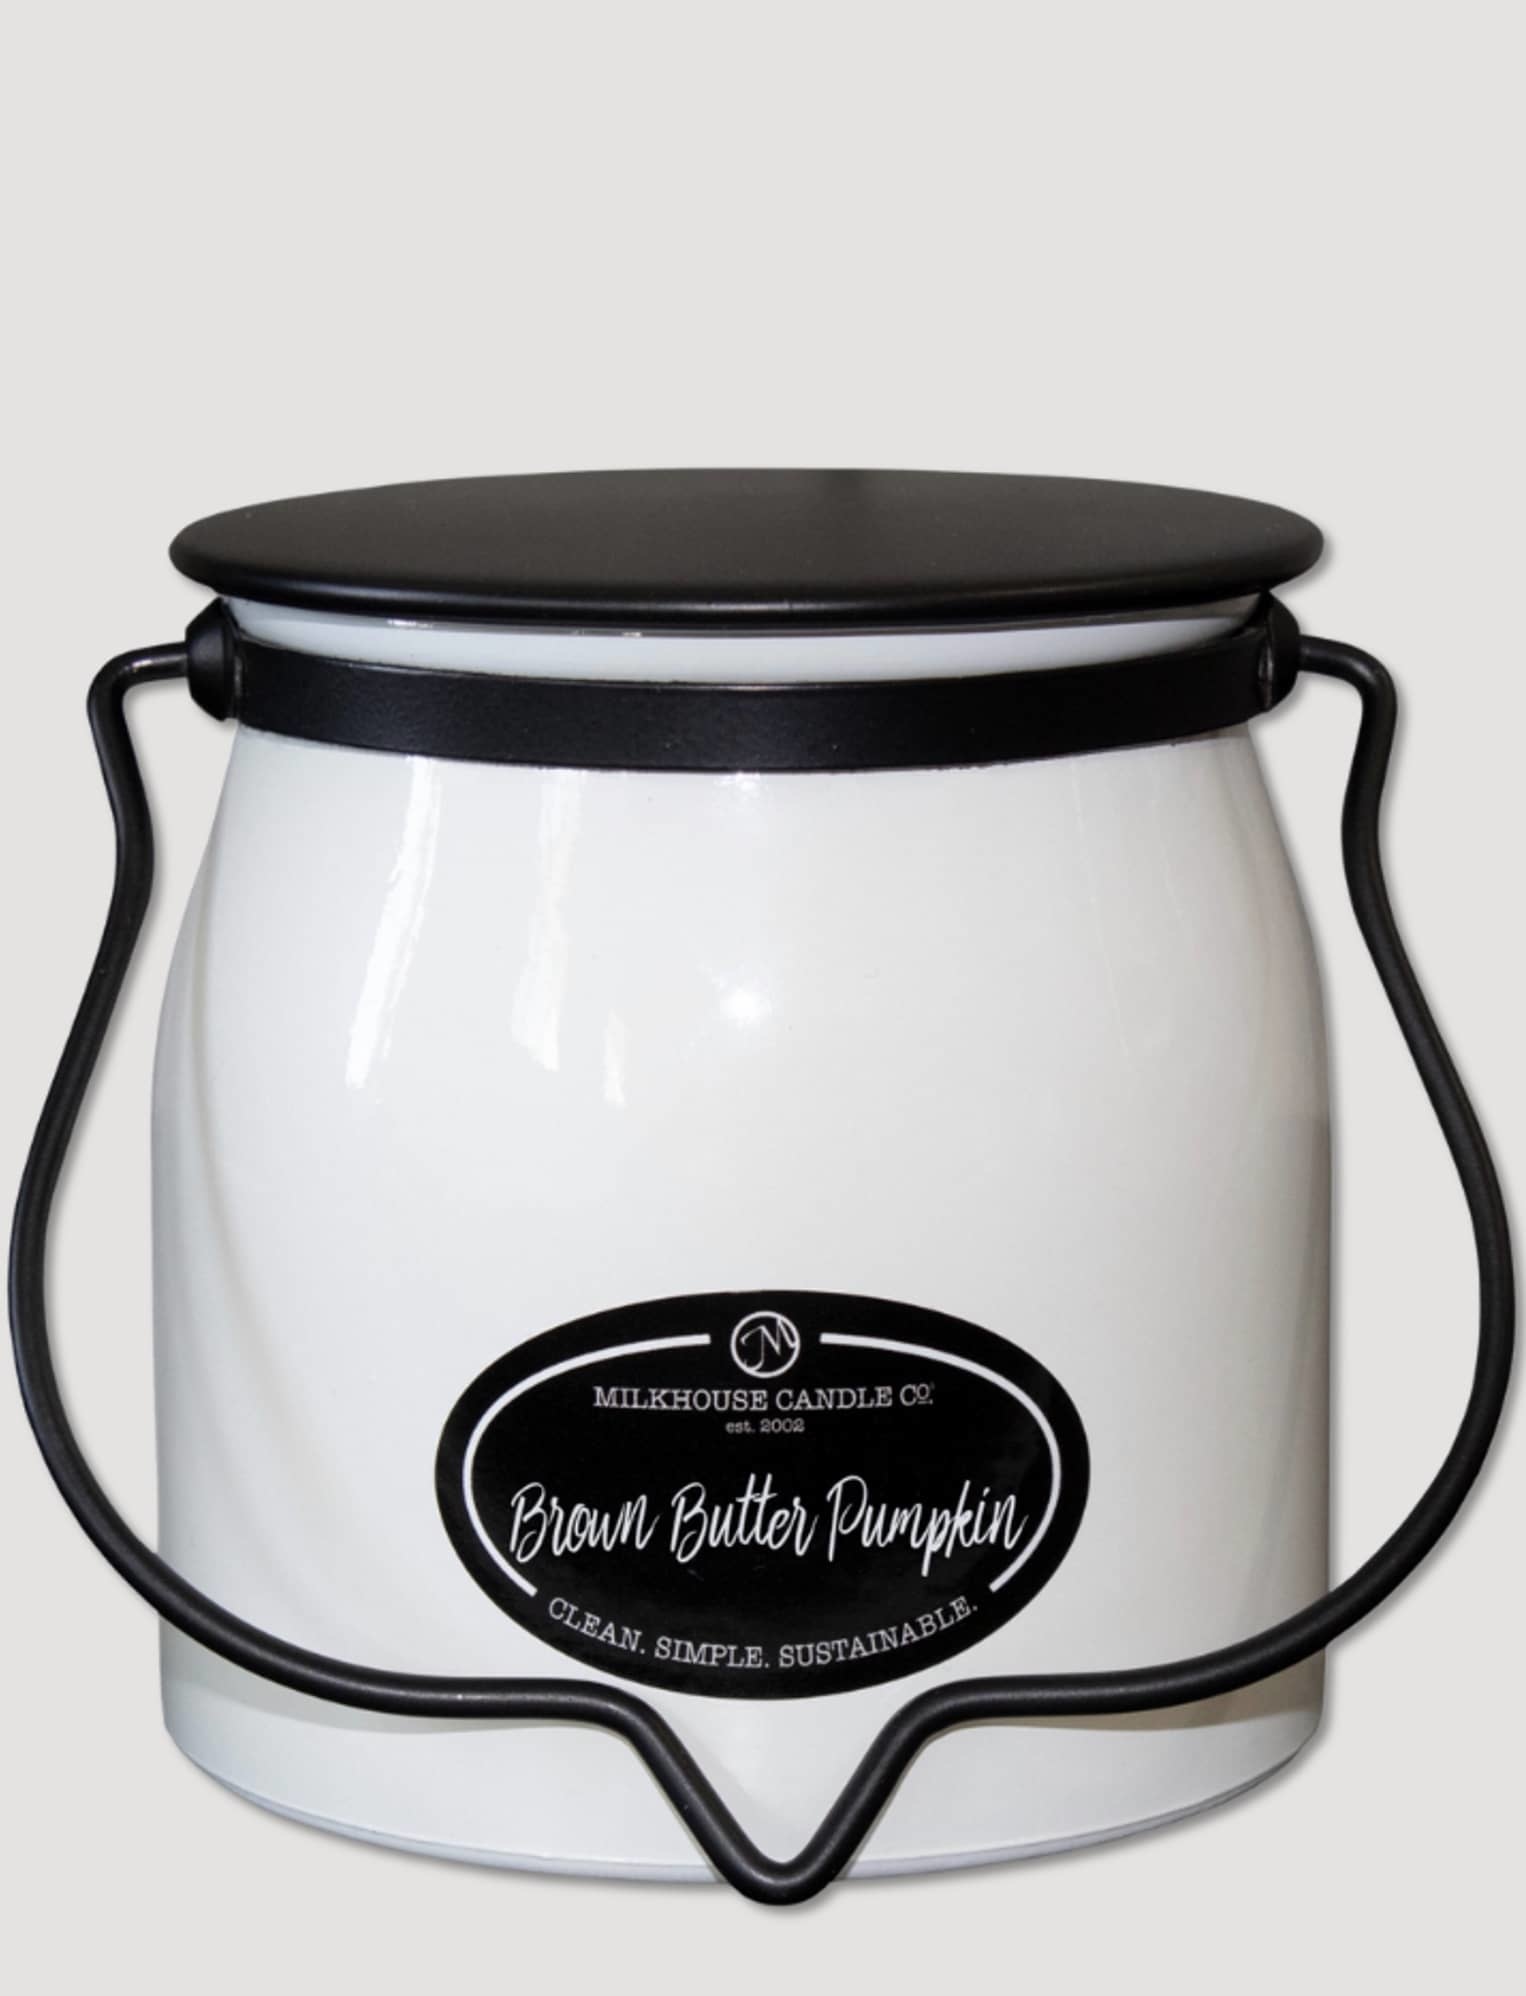 Milkhouse Candles Milkhouse Candle Brown Butter Pumpkin Candle - 16oz Brand: Milkhouse Candles